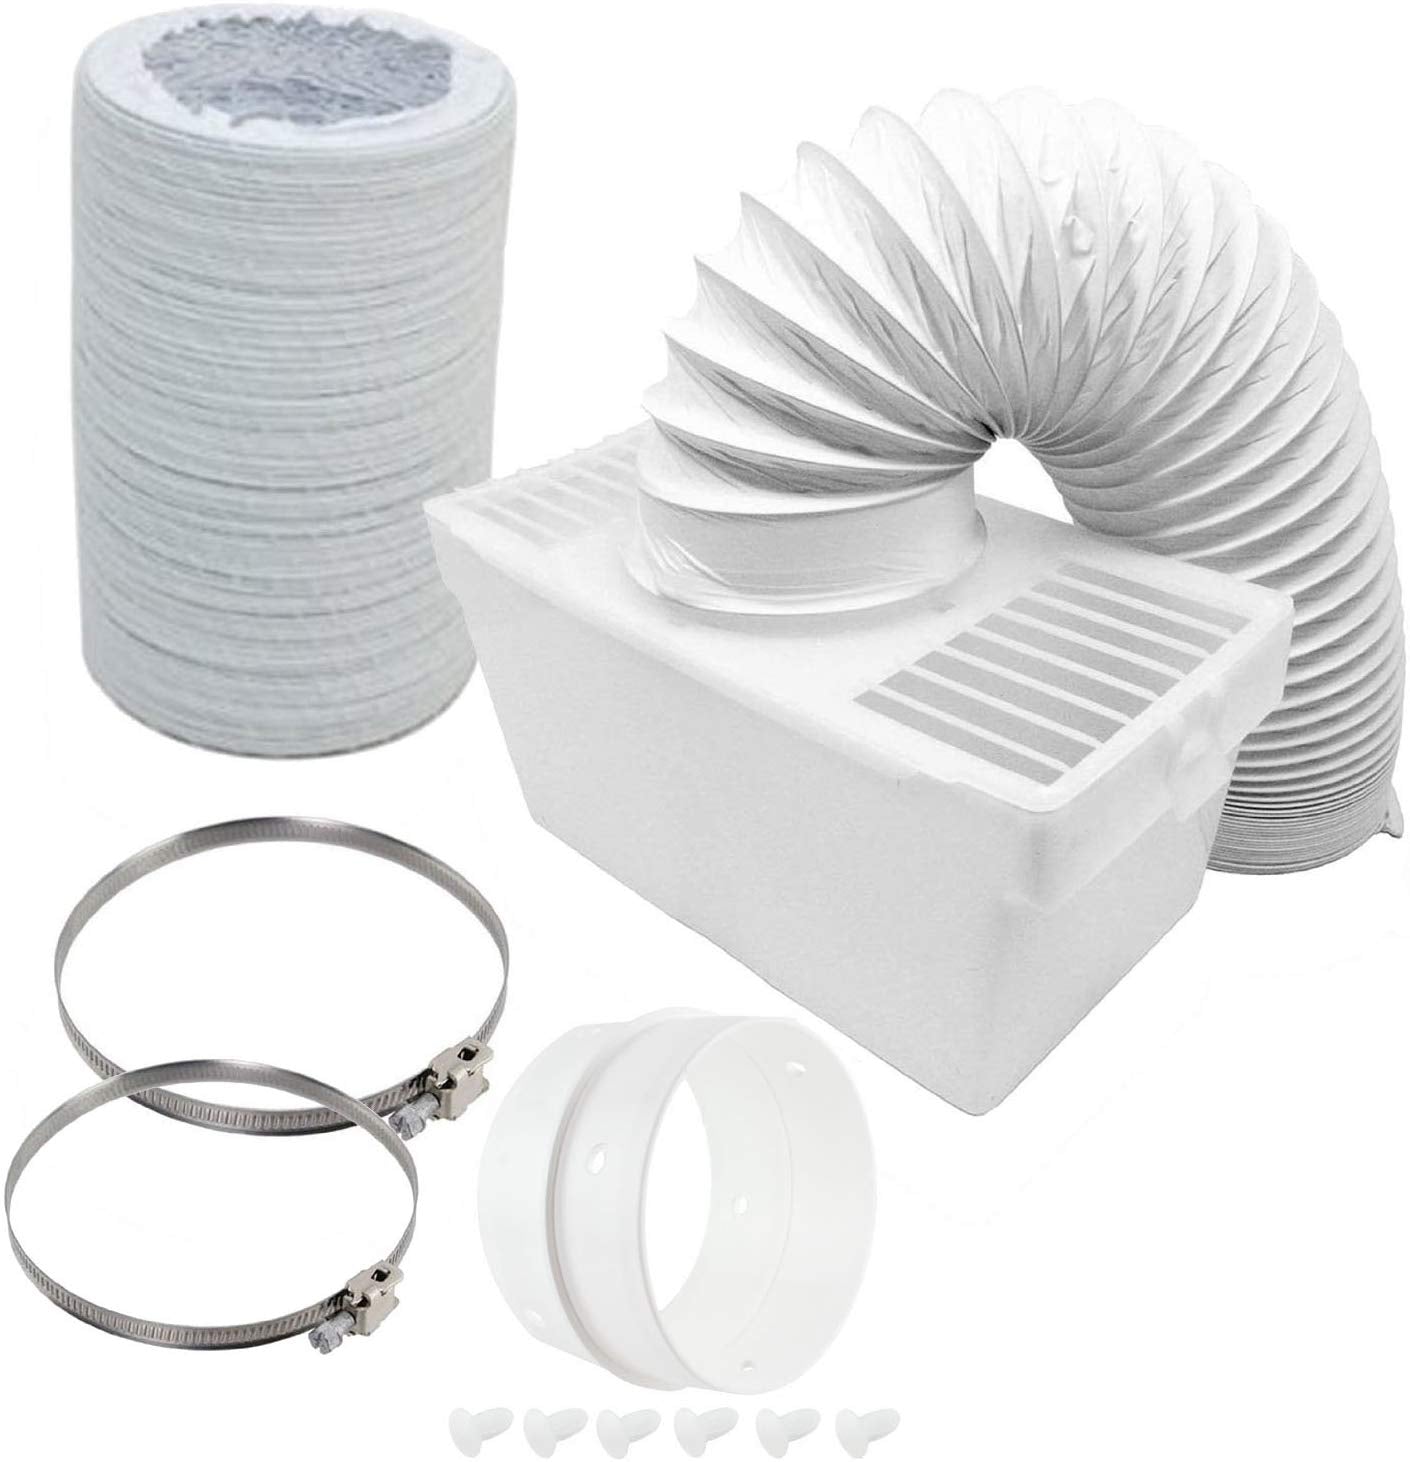 Condenser Box & Extra Long Hose Kit With Connection Ring for Indesit Tumble Dryer (4" / 100mm Diameter / 6M Hose)